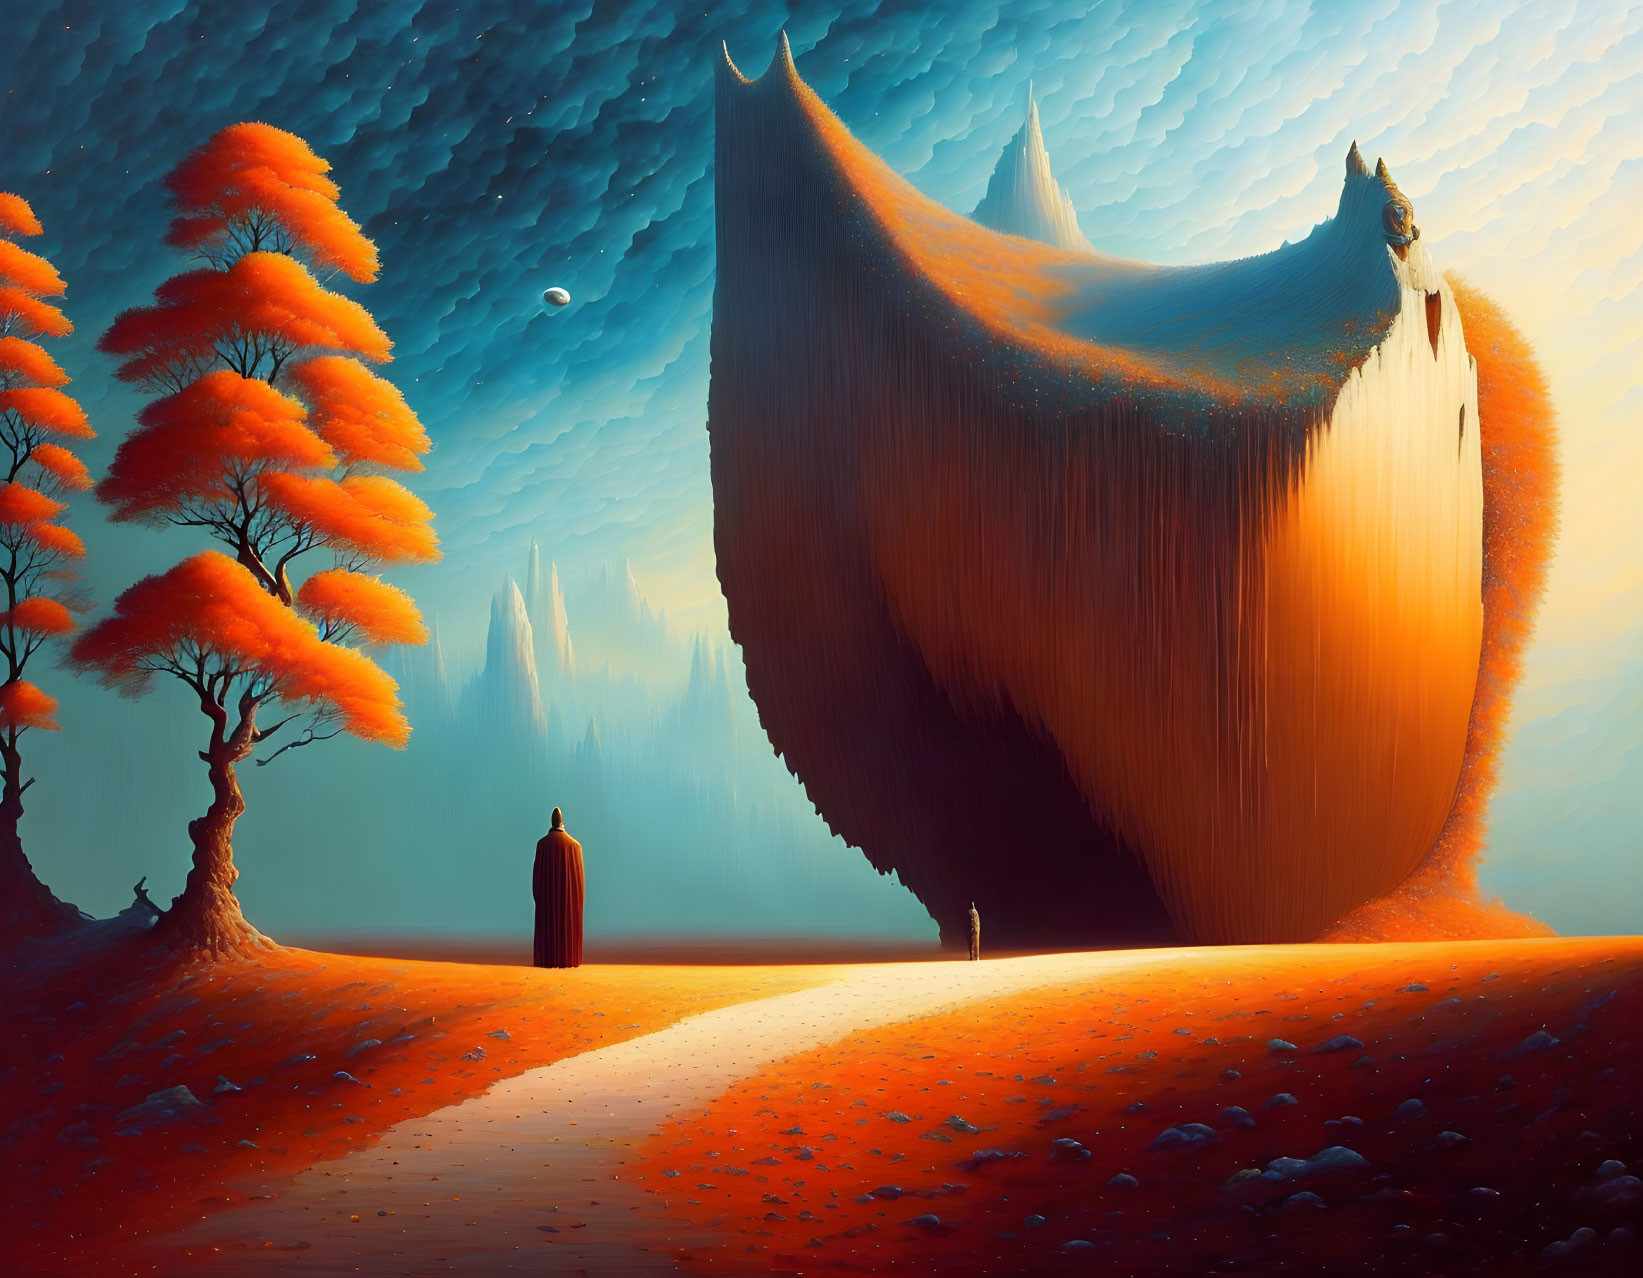 Surreal landscape with figure, oversized trees, floating island, and gradient sky.